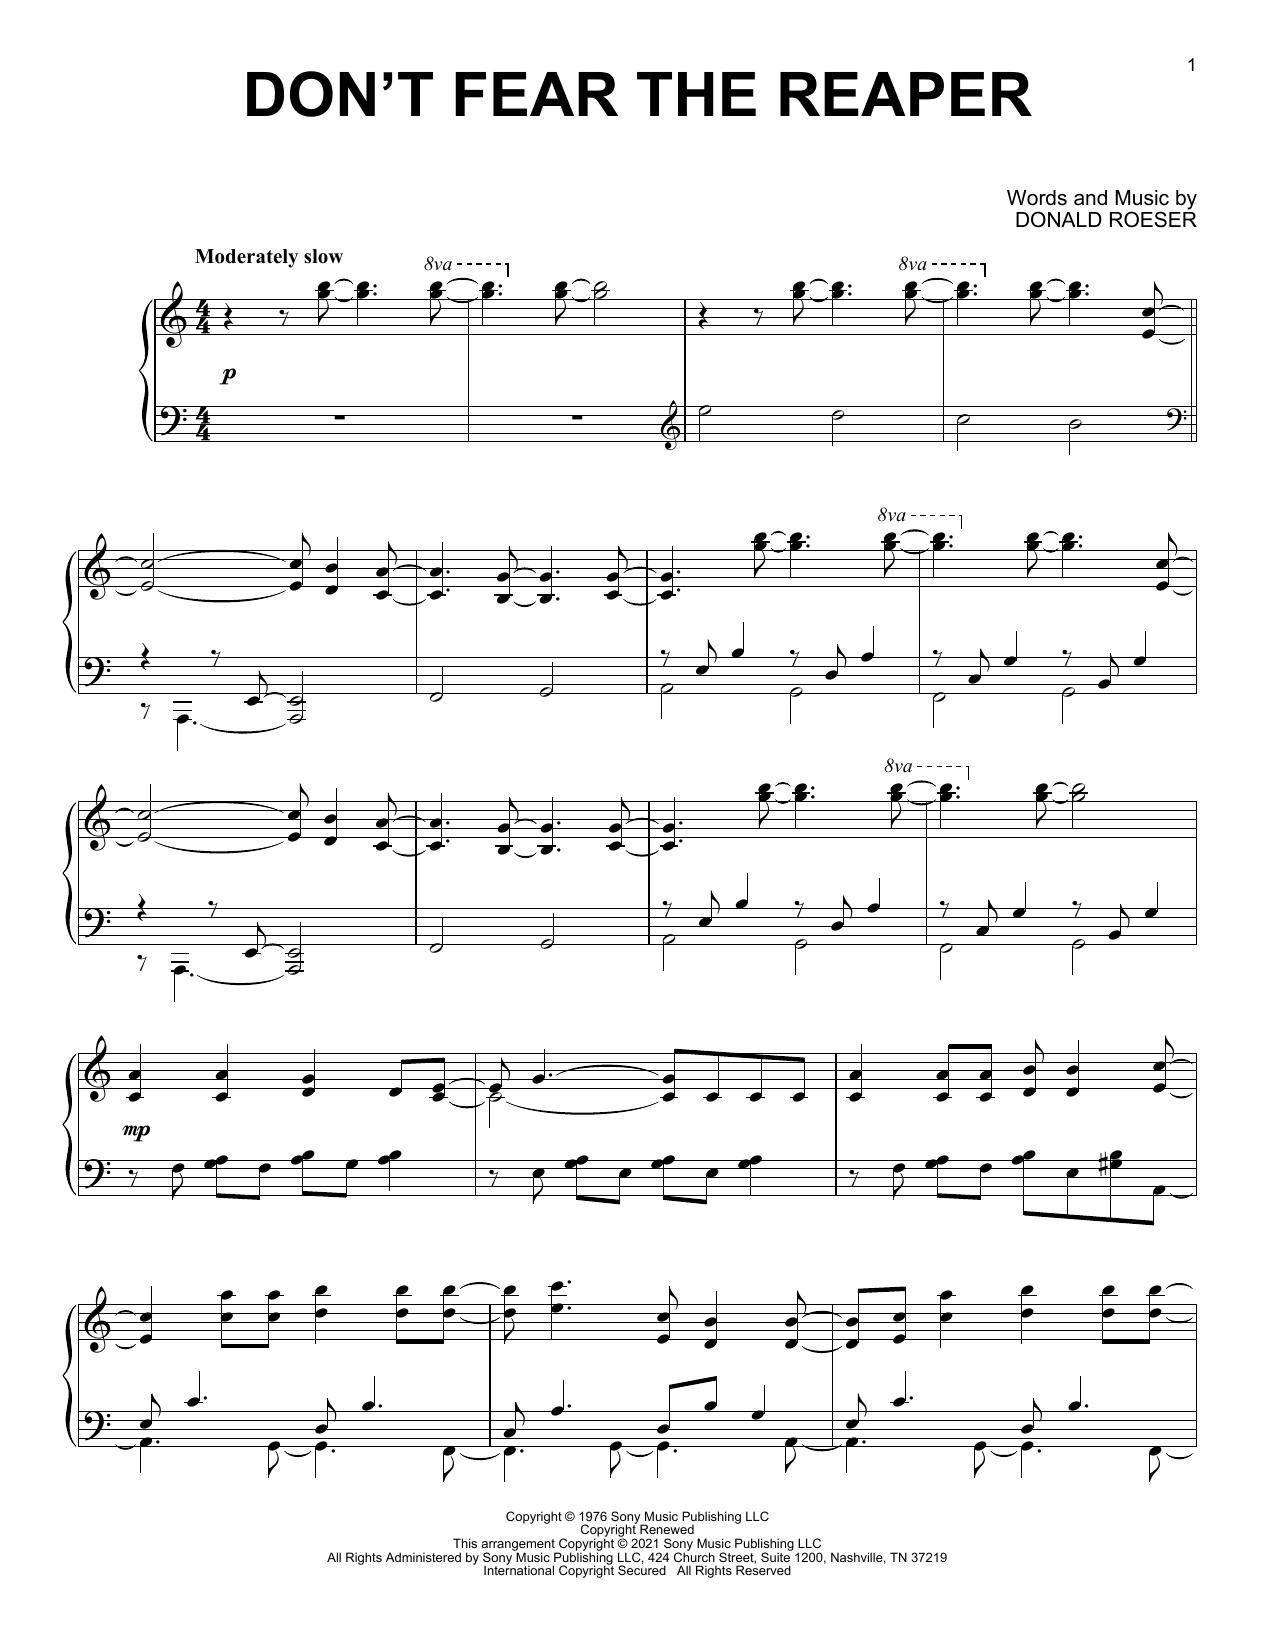 Download Blue Oyster Cult Don't Fear The Reaper [Classical versio Sheet Music